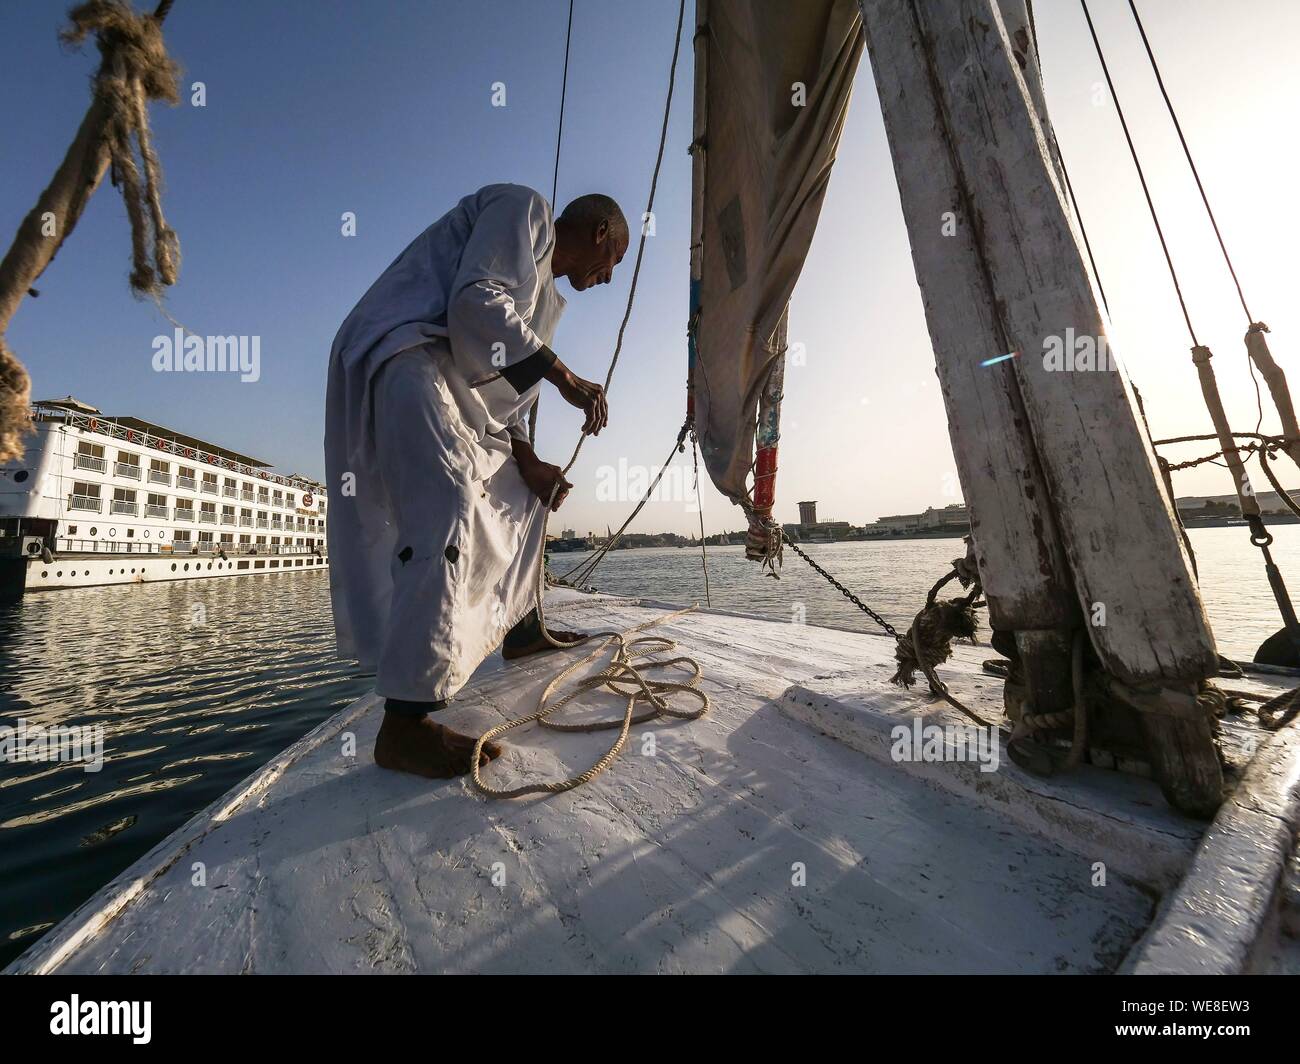 Egypt, Upper Egypt, Nubia, Nile Valley, Aswan, On board a felucca, the captain folds his sail before docking Stock Photo